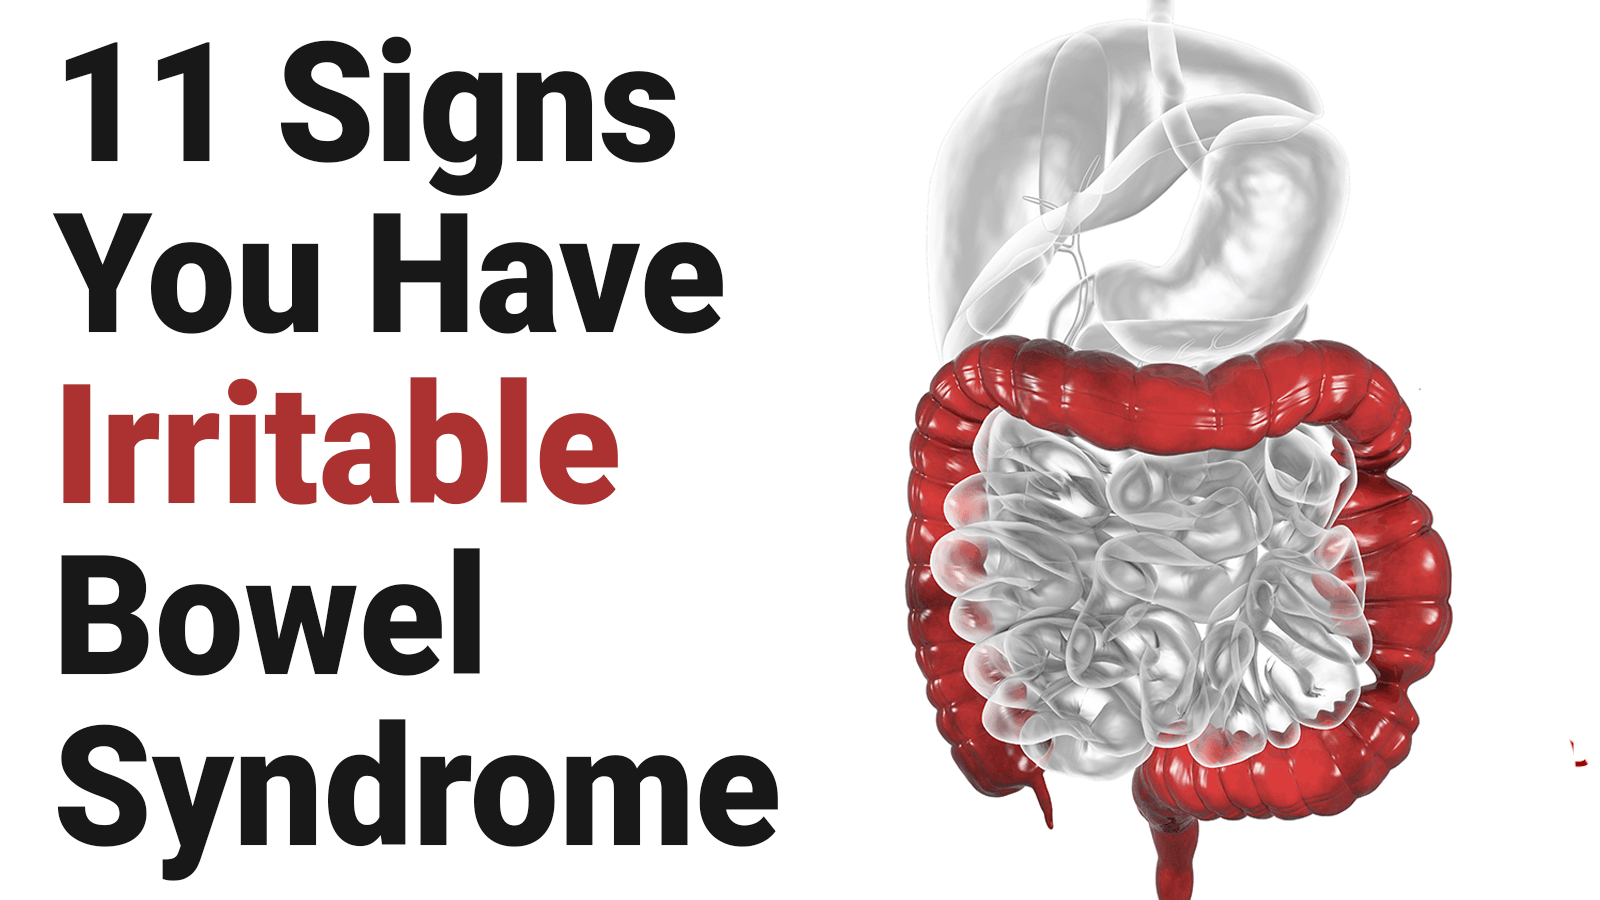 11 Signs You Have Irritable Bowel Syndrome